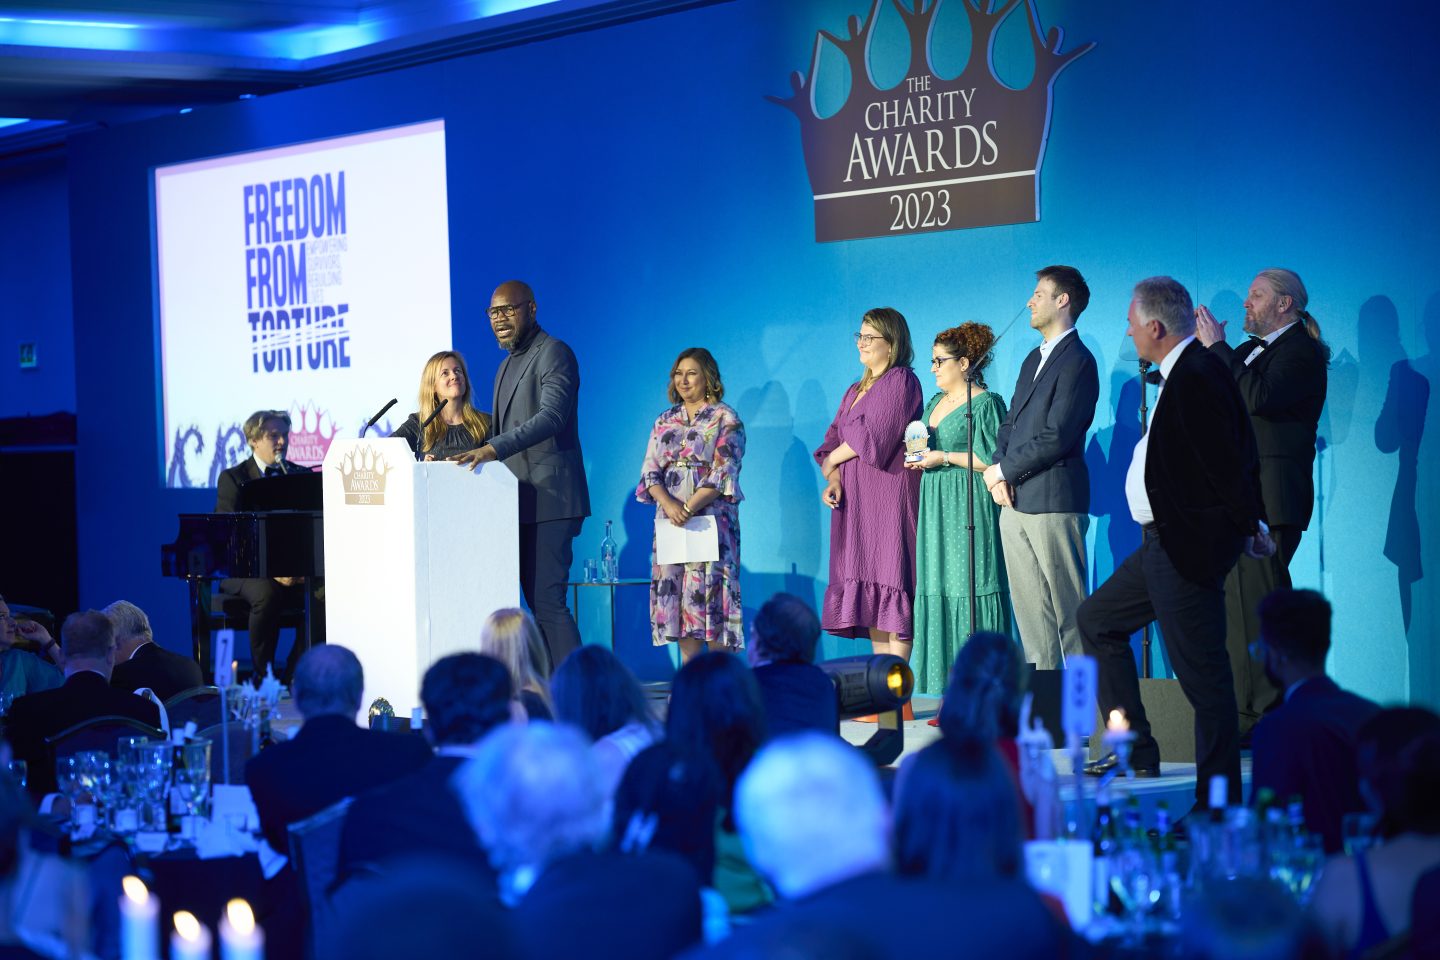 The 2023 Charity Awards Gallery